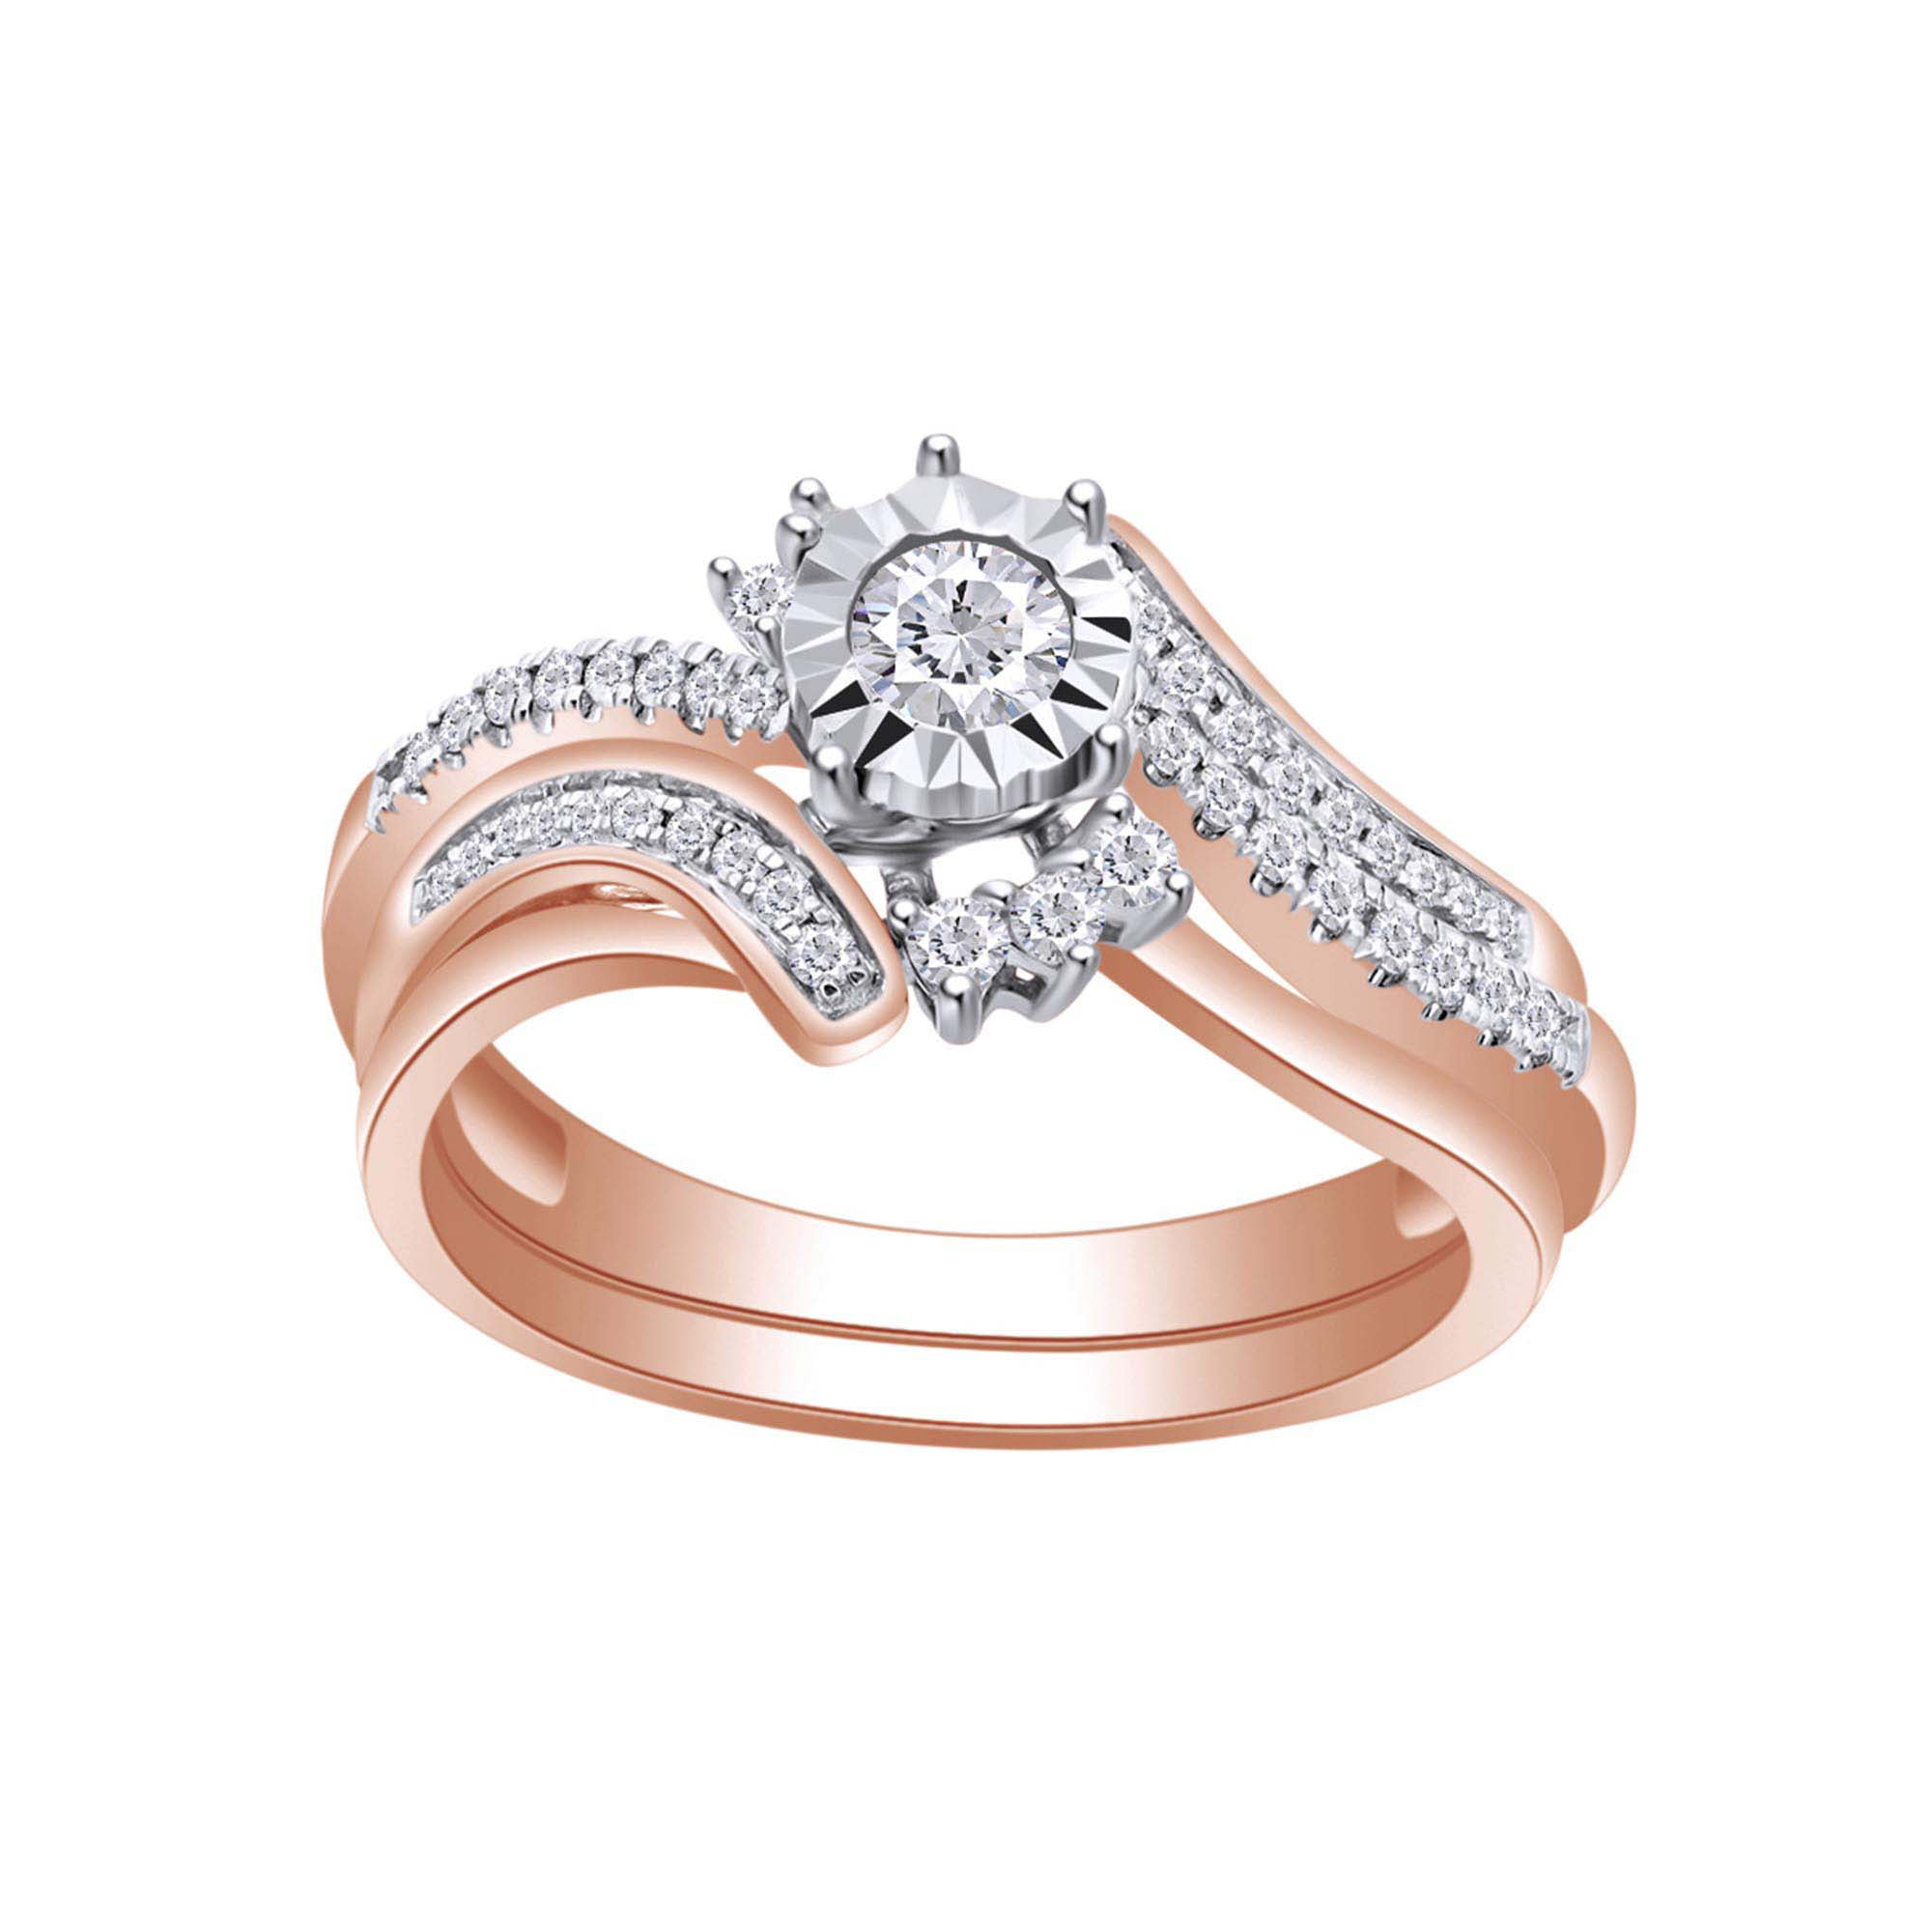 Diamond Wedding Band in 14K Pink Gold Size-6 G-H,I2-I3 1/8 cttw,